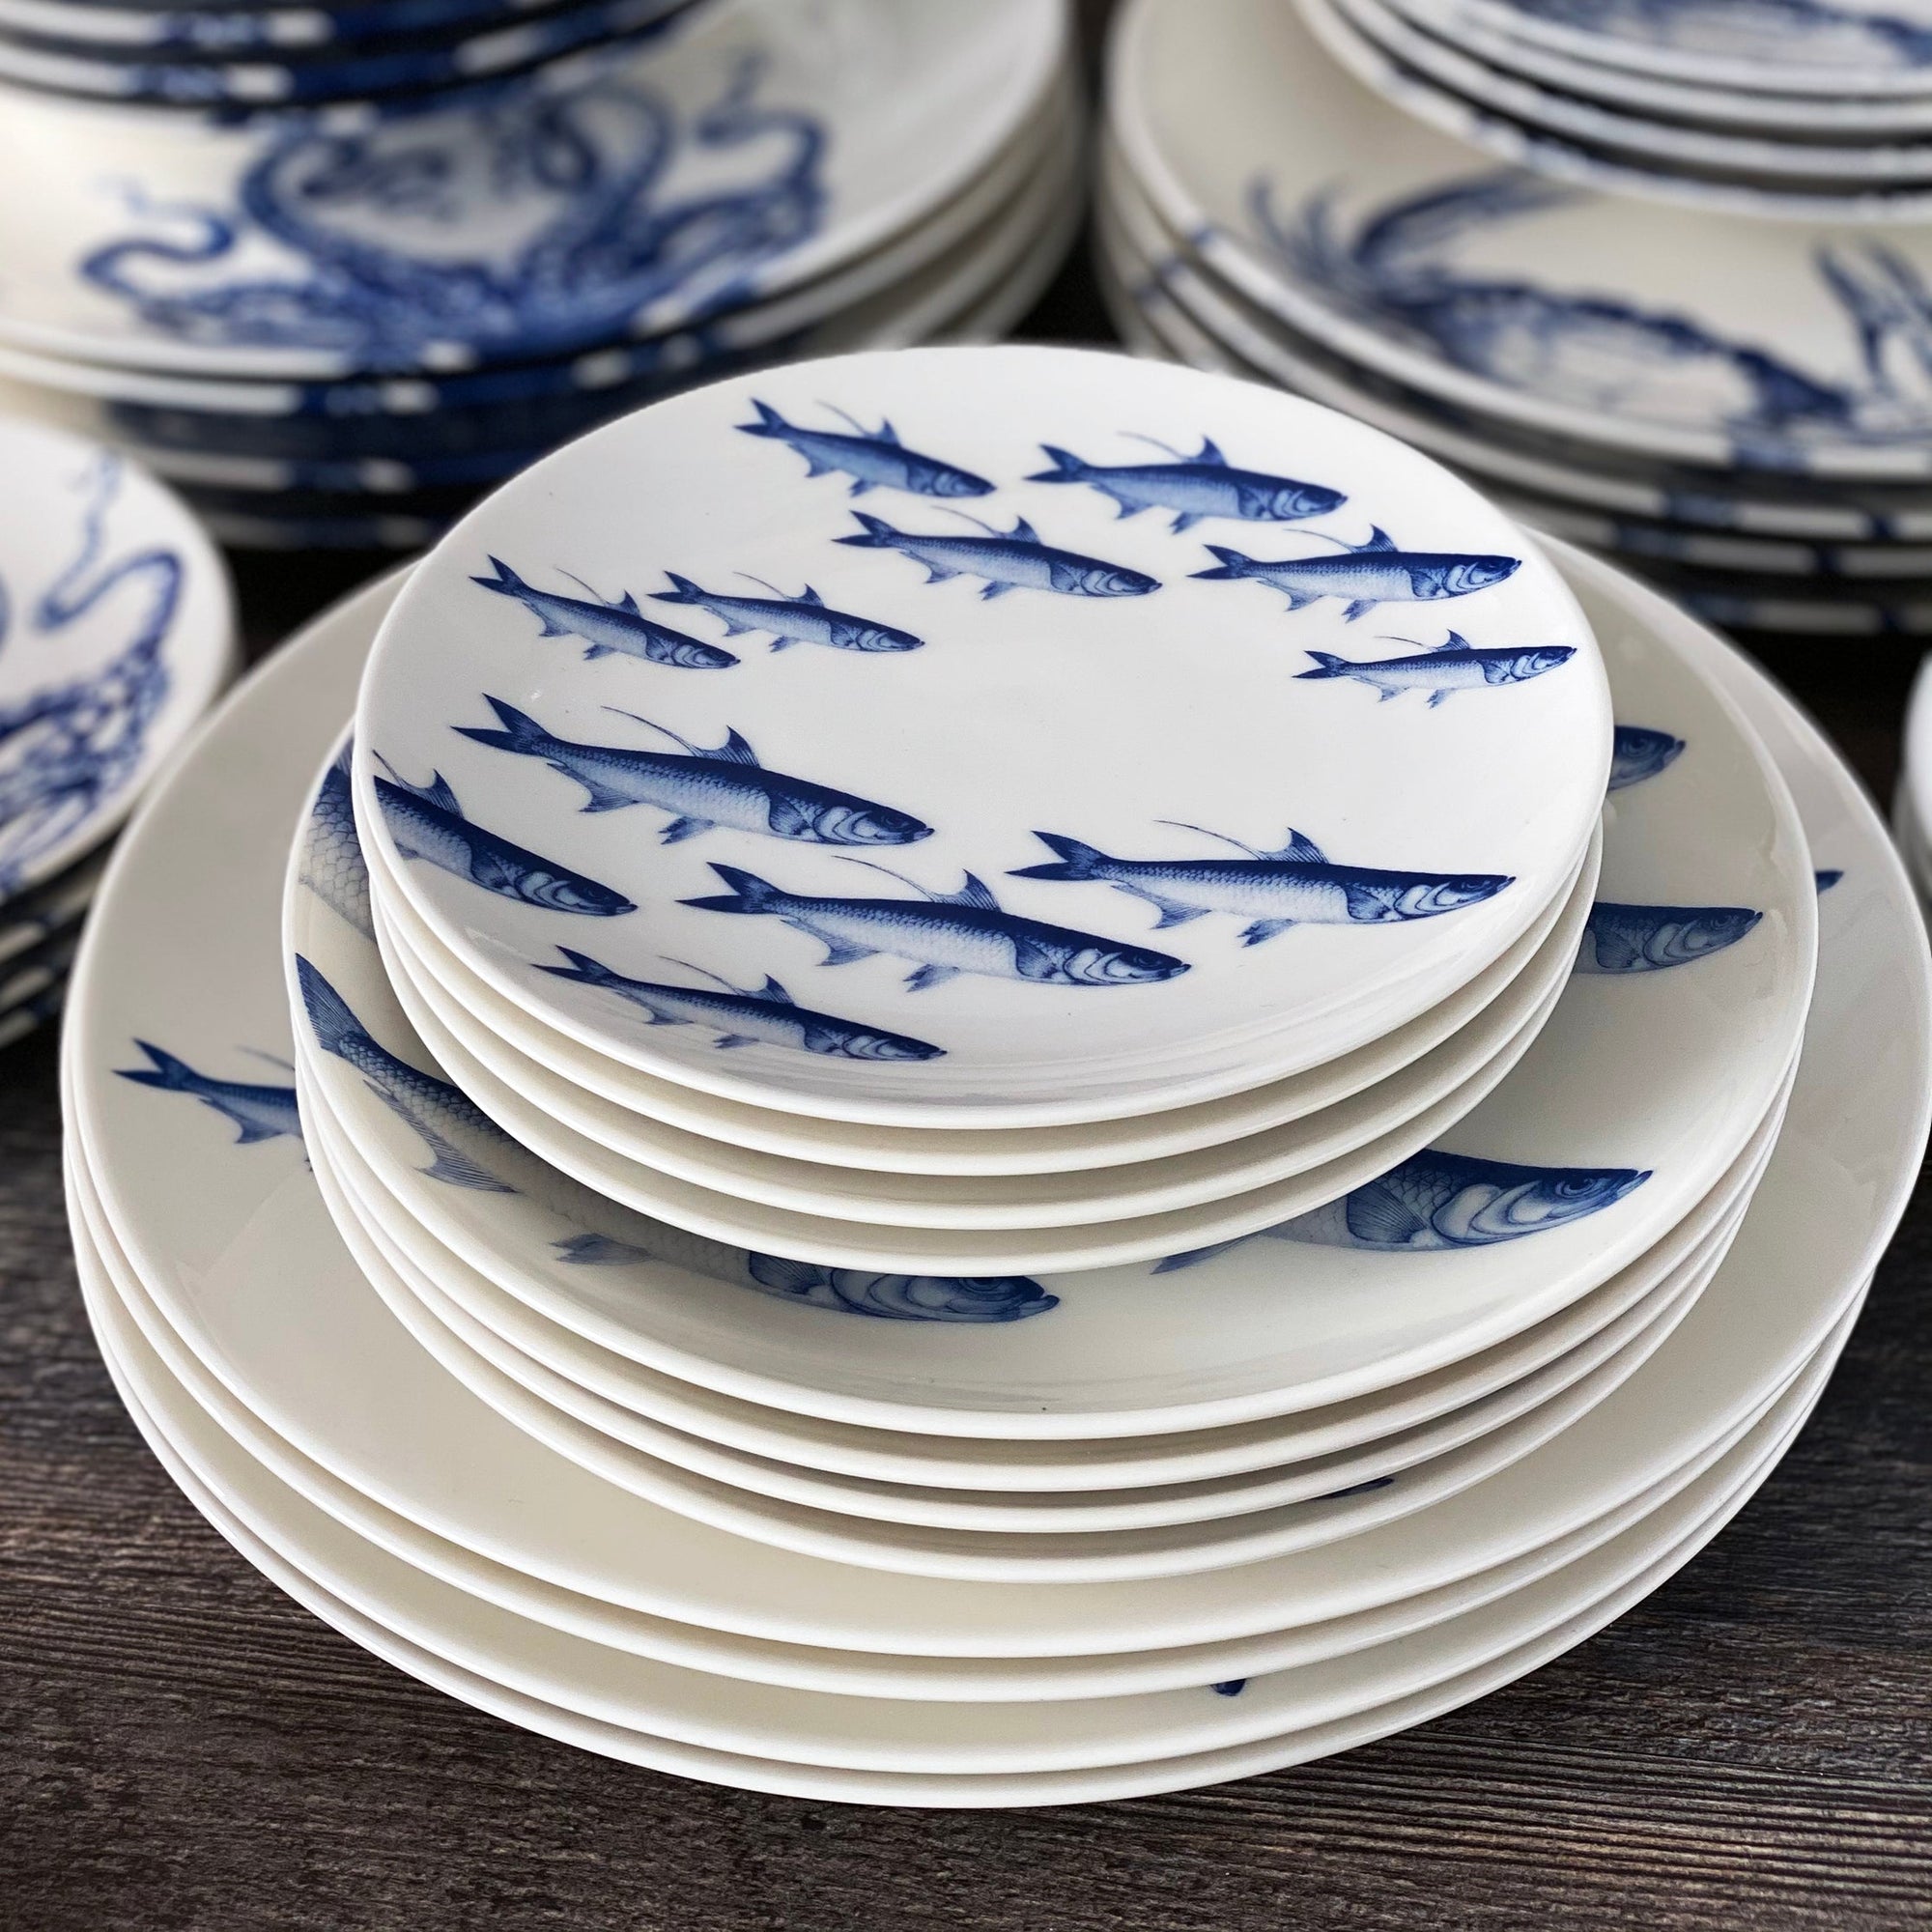 A Coastal Collection 48 Pc. Set by Caskata Artisanal Home, consisting of blue and white plates and cups, is placed on a wooden table, exuding a tranquil sea and ocean vibe with beautiful patterns.